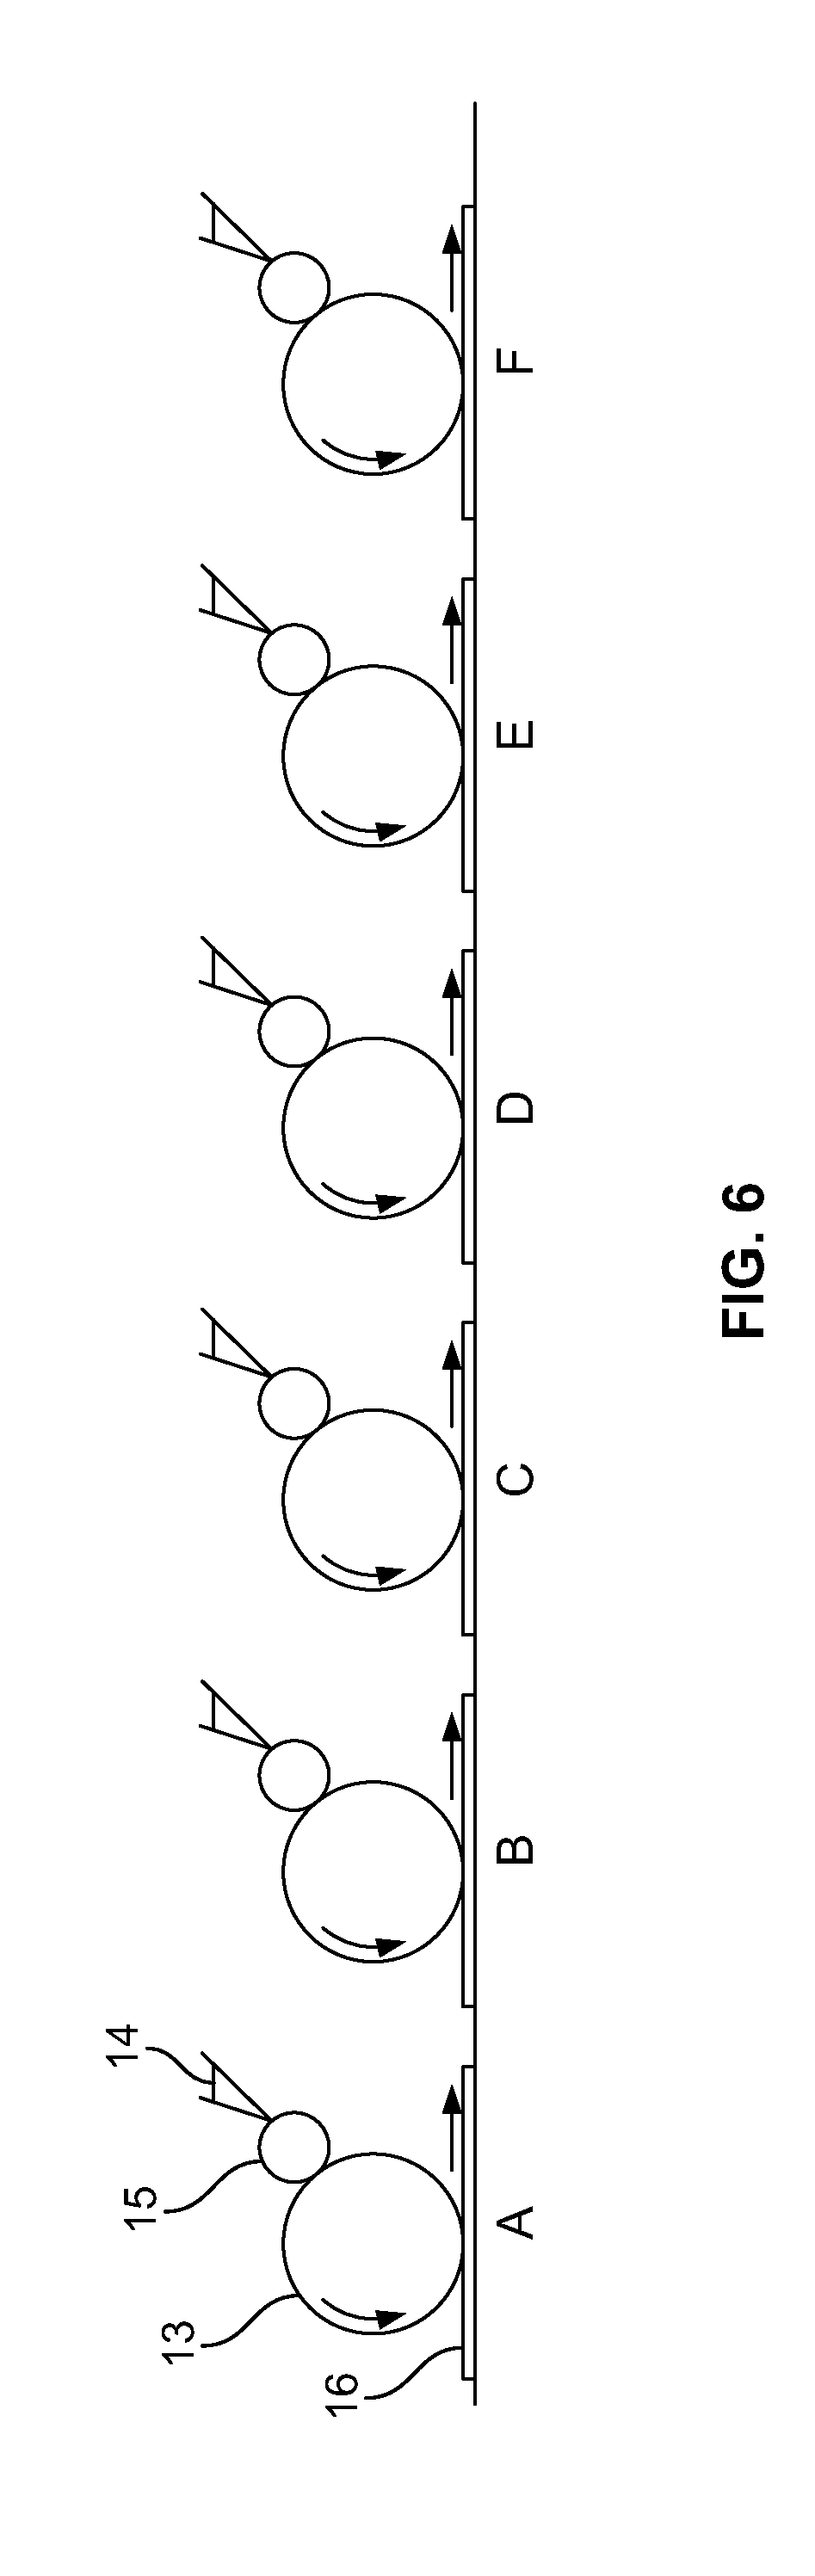 One-Way Graphics Materials and Methods